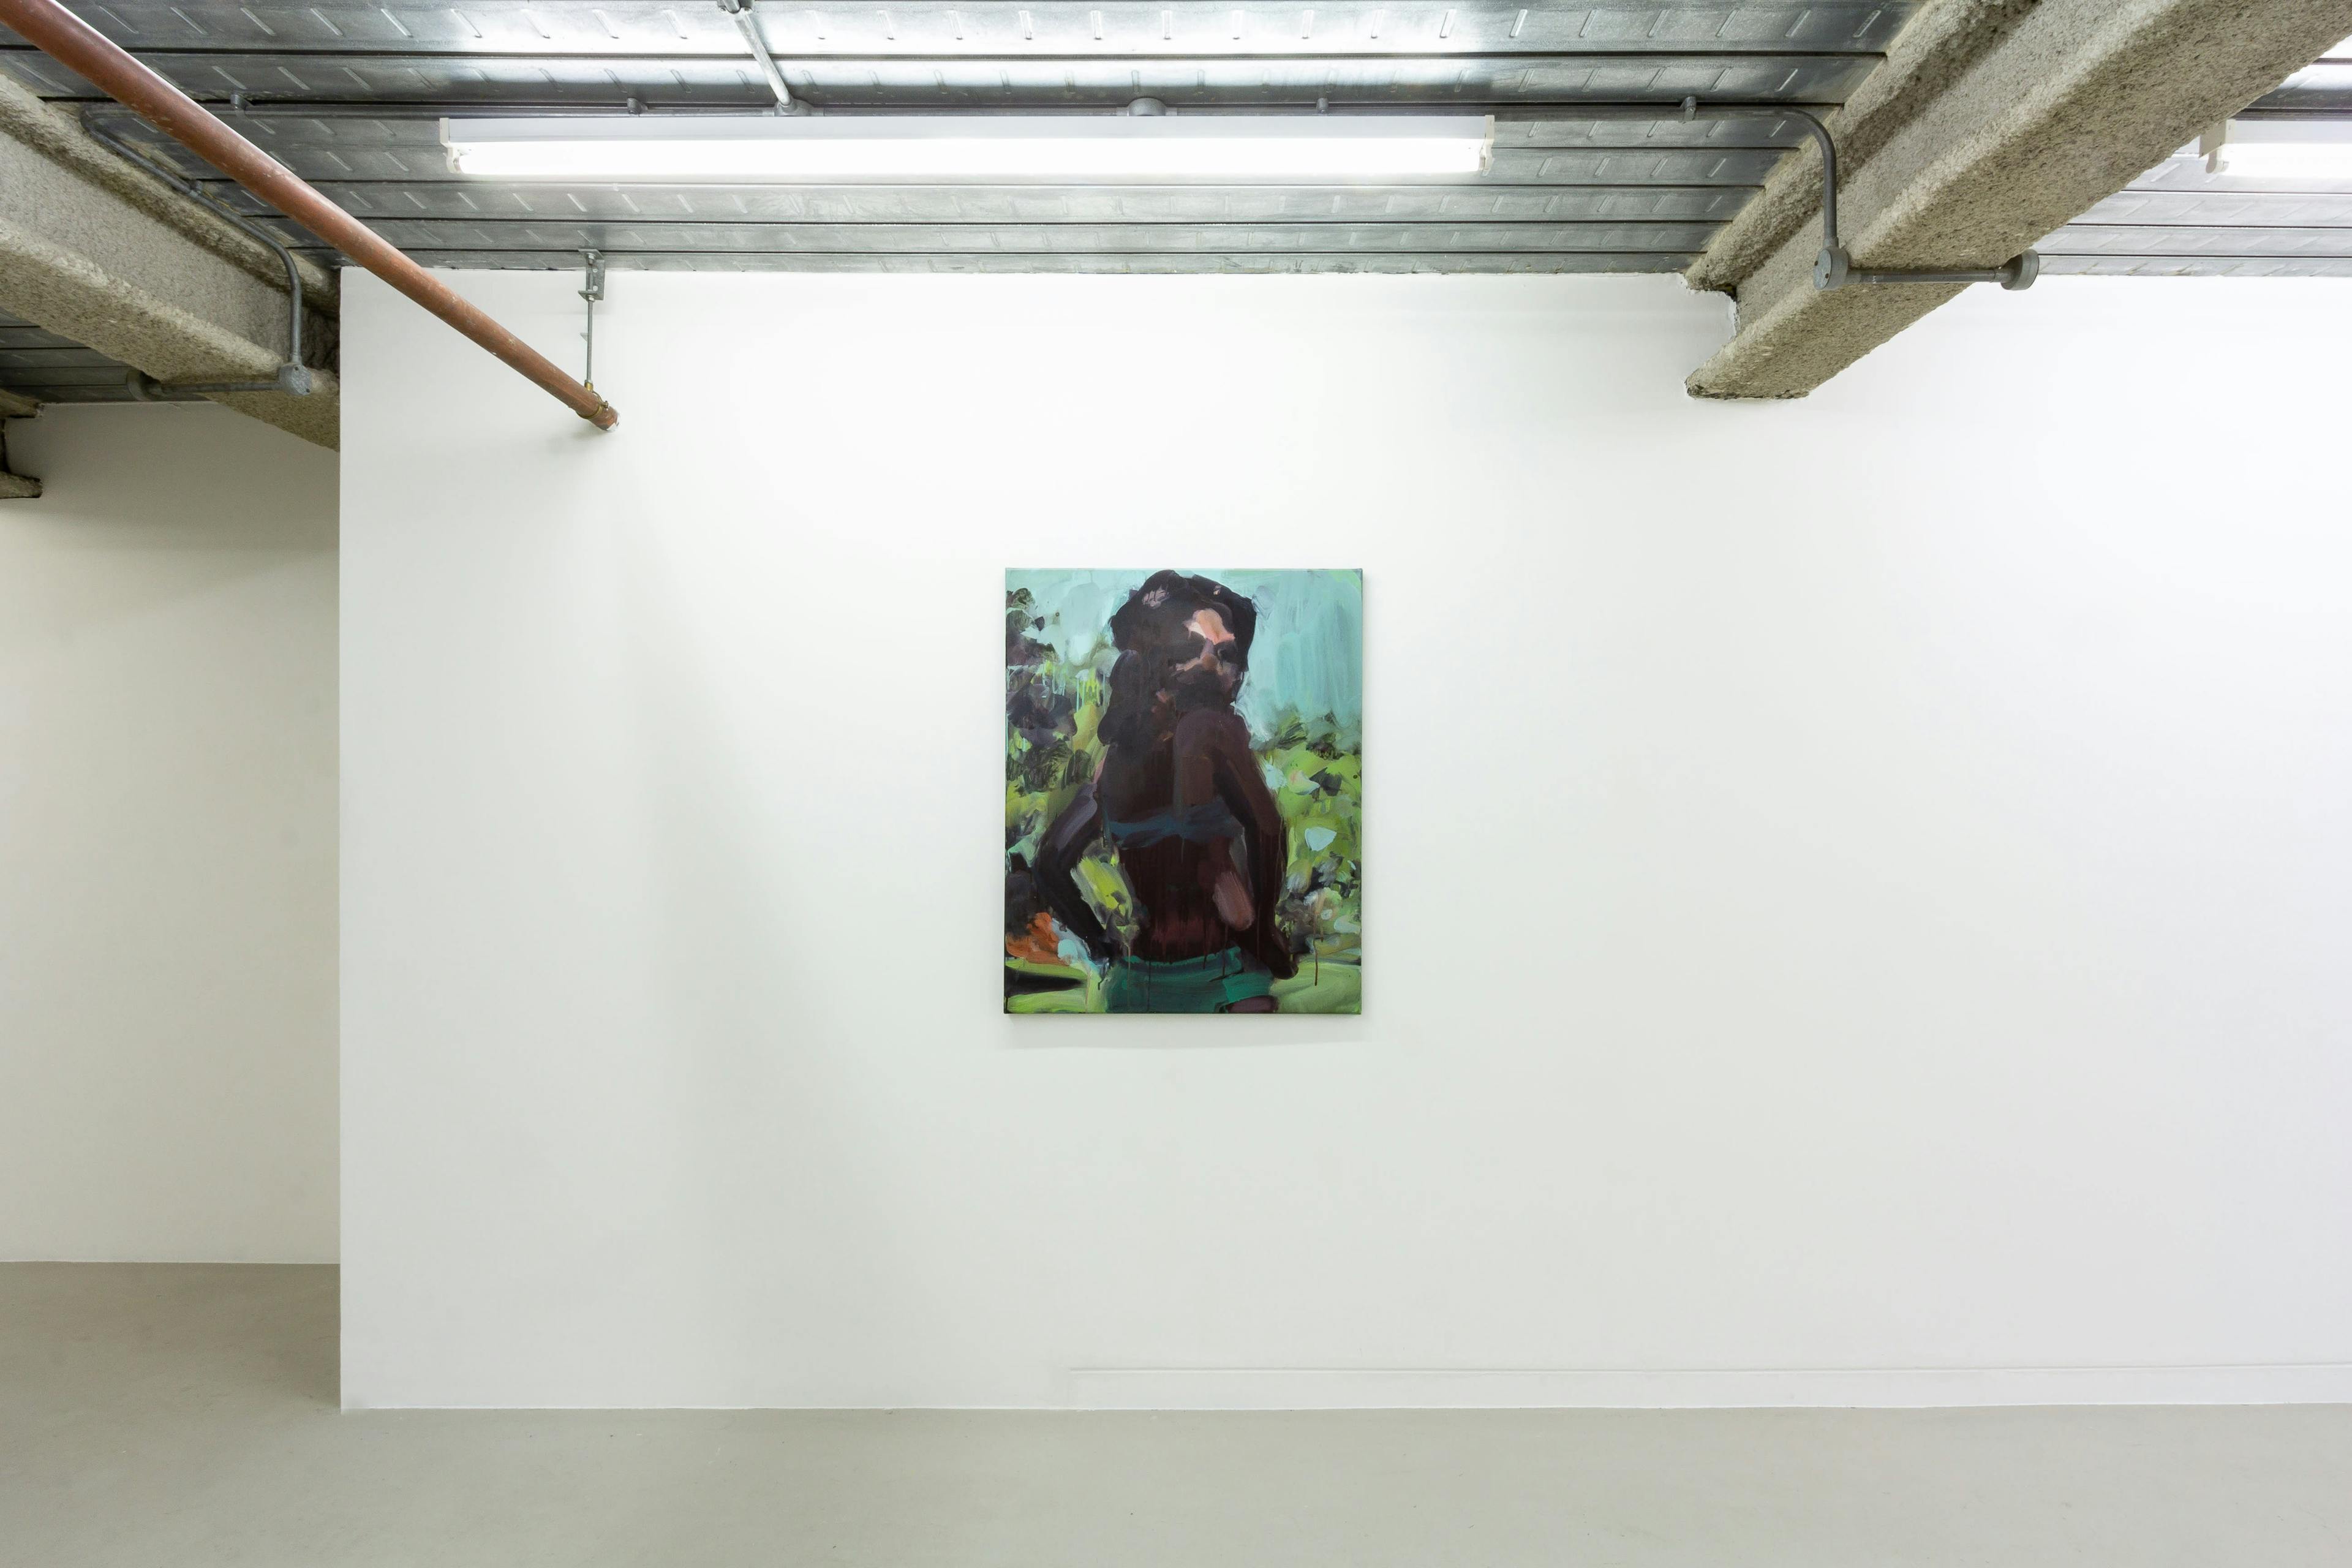 Installation photographs of Laura Lancaster's exhibition 'Shadows and Mirrors' at Workplace | London - 61 Conduit Street 